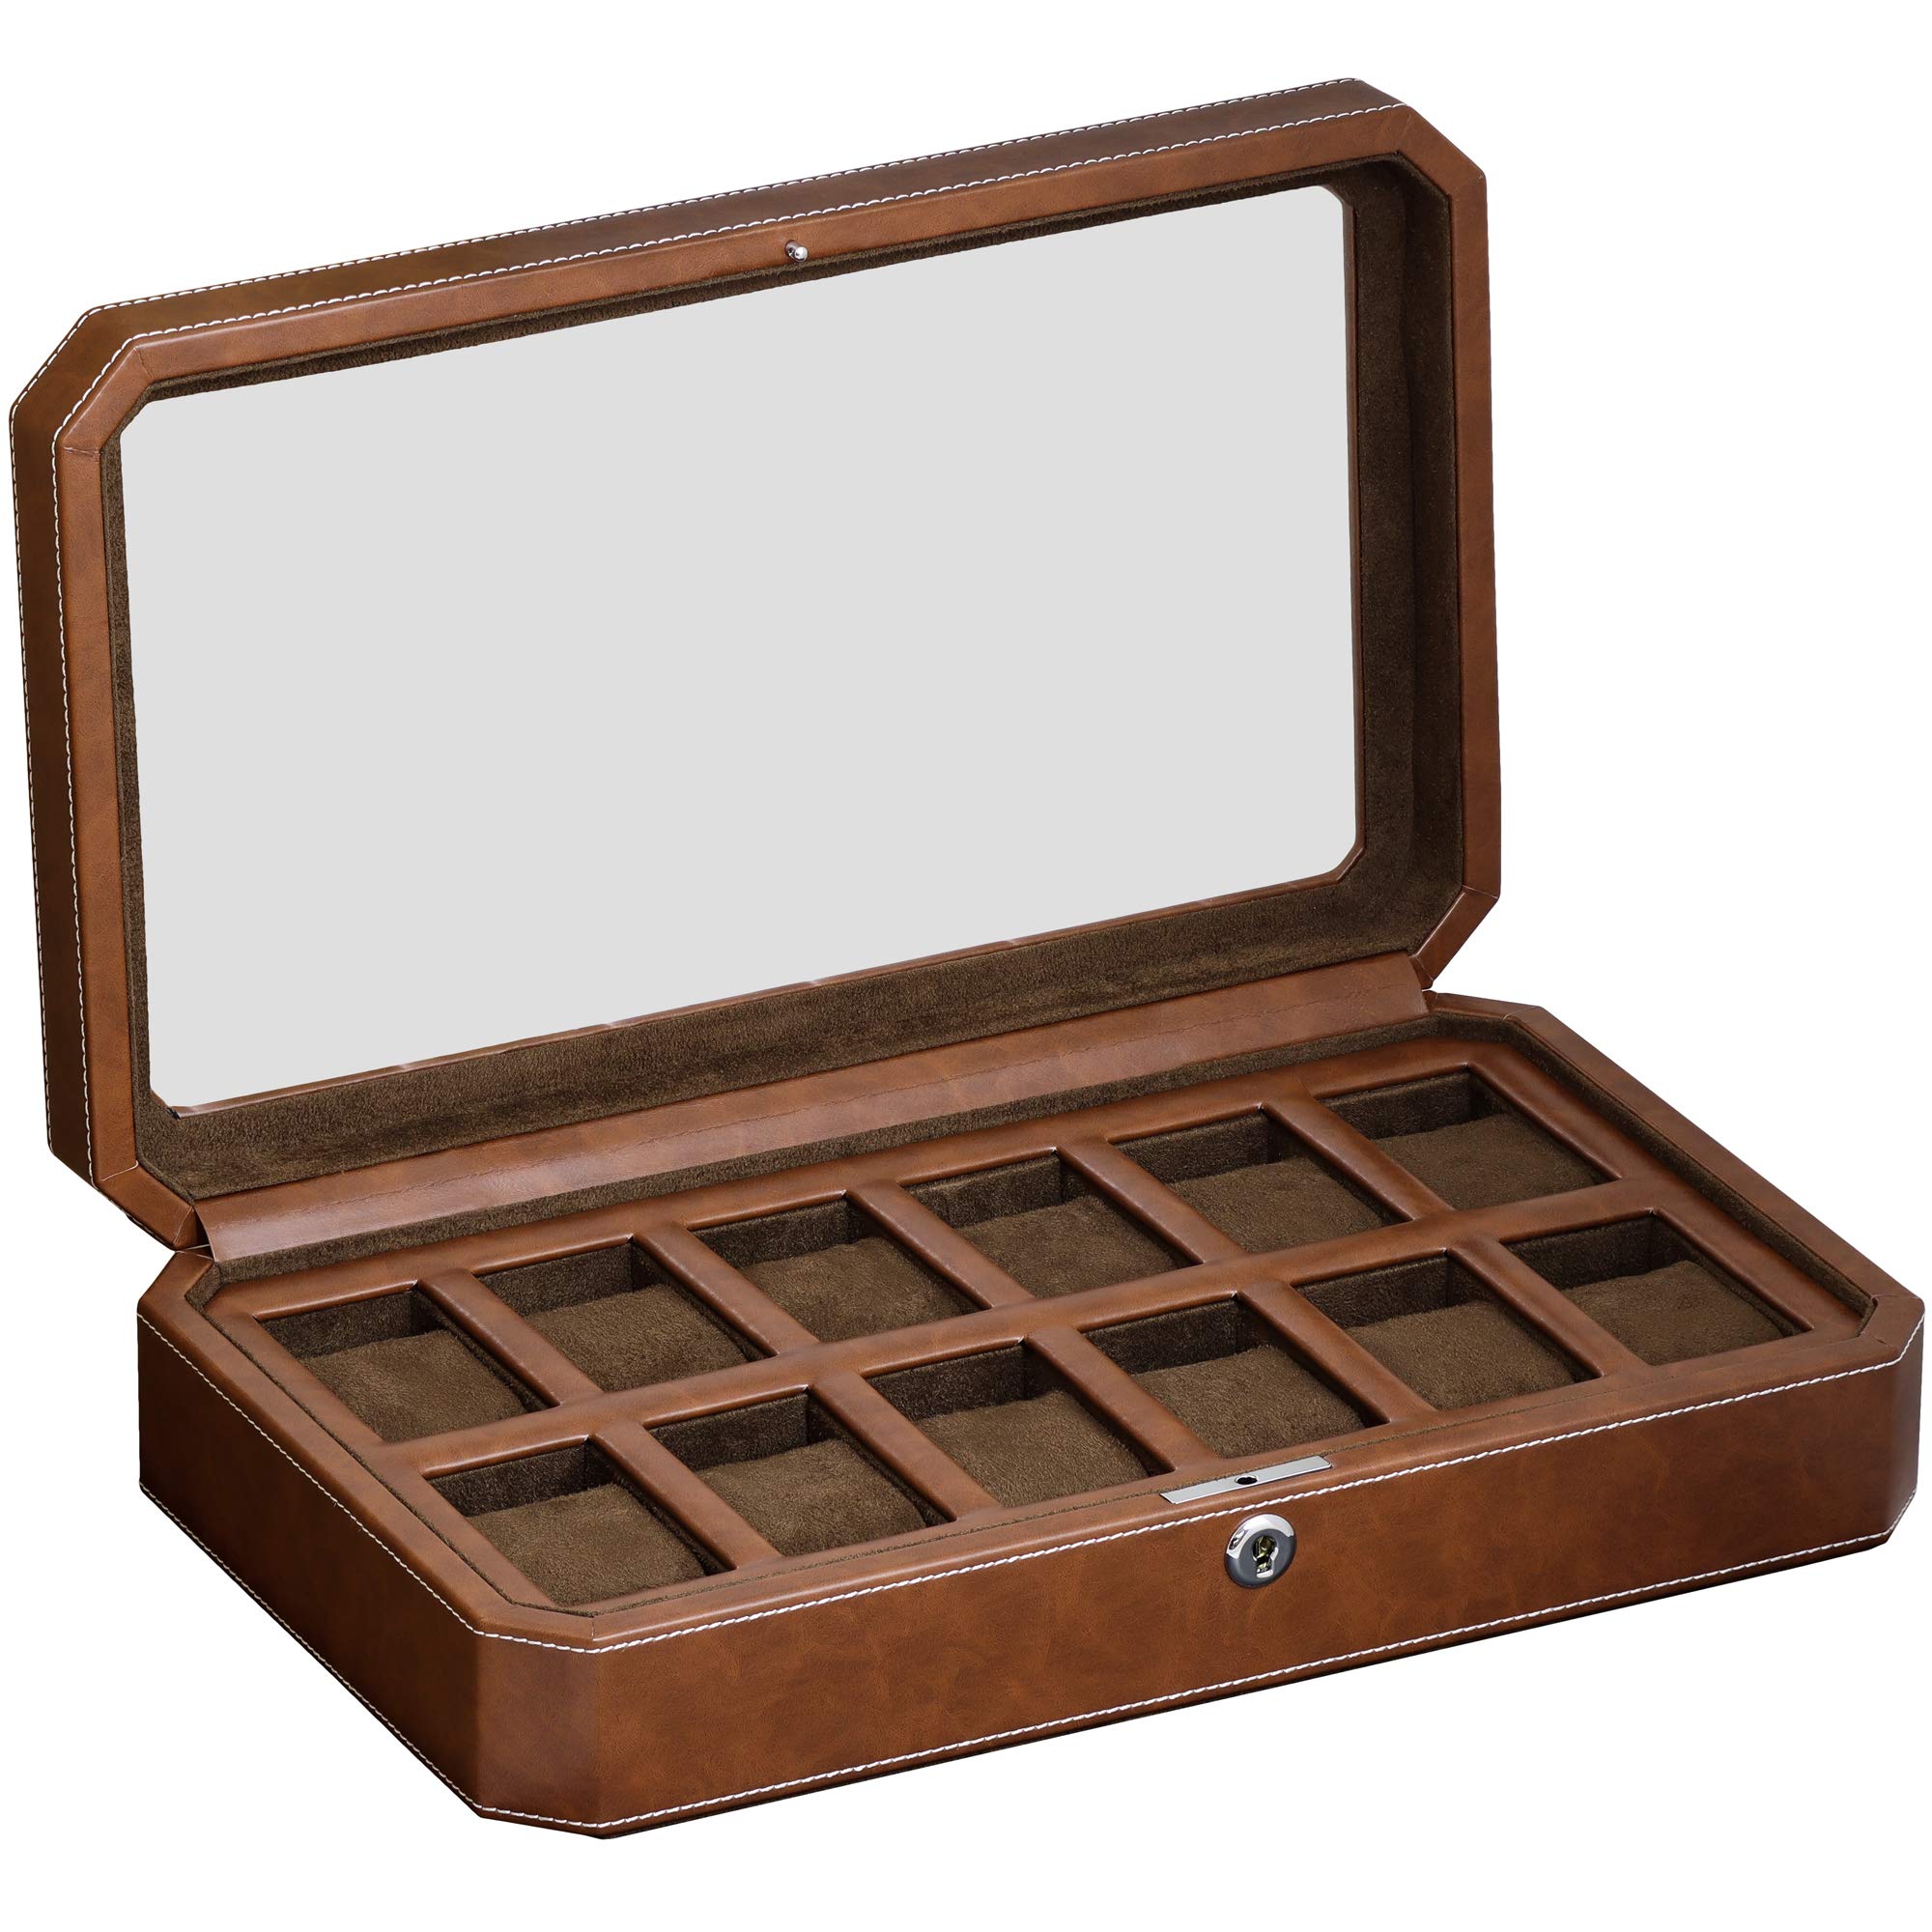 ROTHWELL 12 Slot Leather Watch Box - Luxury Watch Case Display Organizer, Microsuede Liner, Locking Mens Jewelry Watches Holder, Men's Storage Boxes Holder Large Glass Top (Tan/Brown)